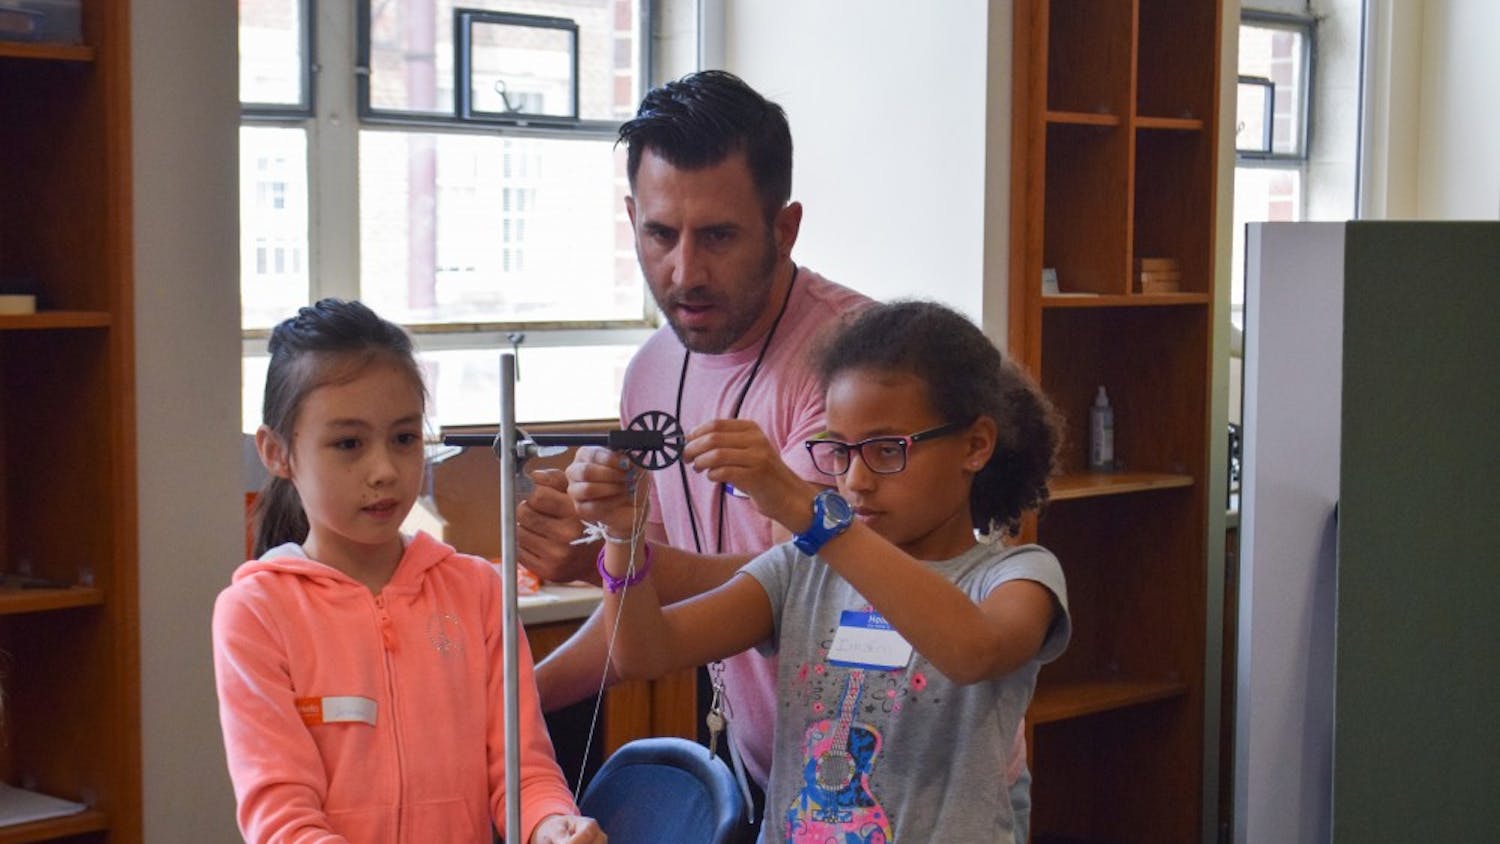 Carolina's Department of Physics and Astronomy hosted third and fourth graders from three local elementary schools for a "Science is Awesome" outreach event on May 15.